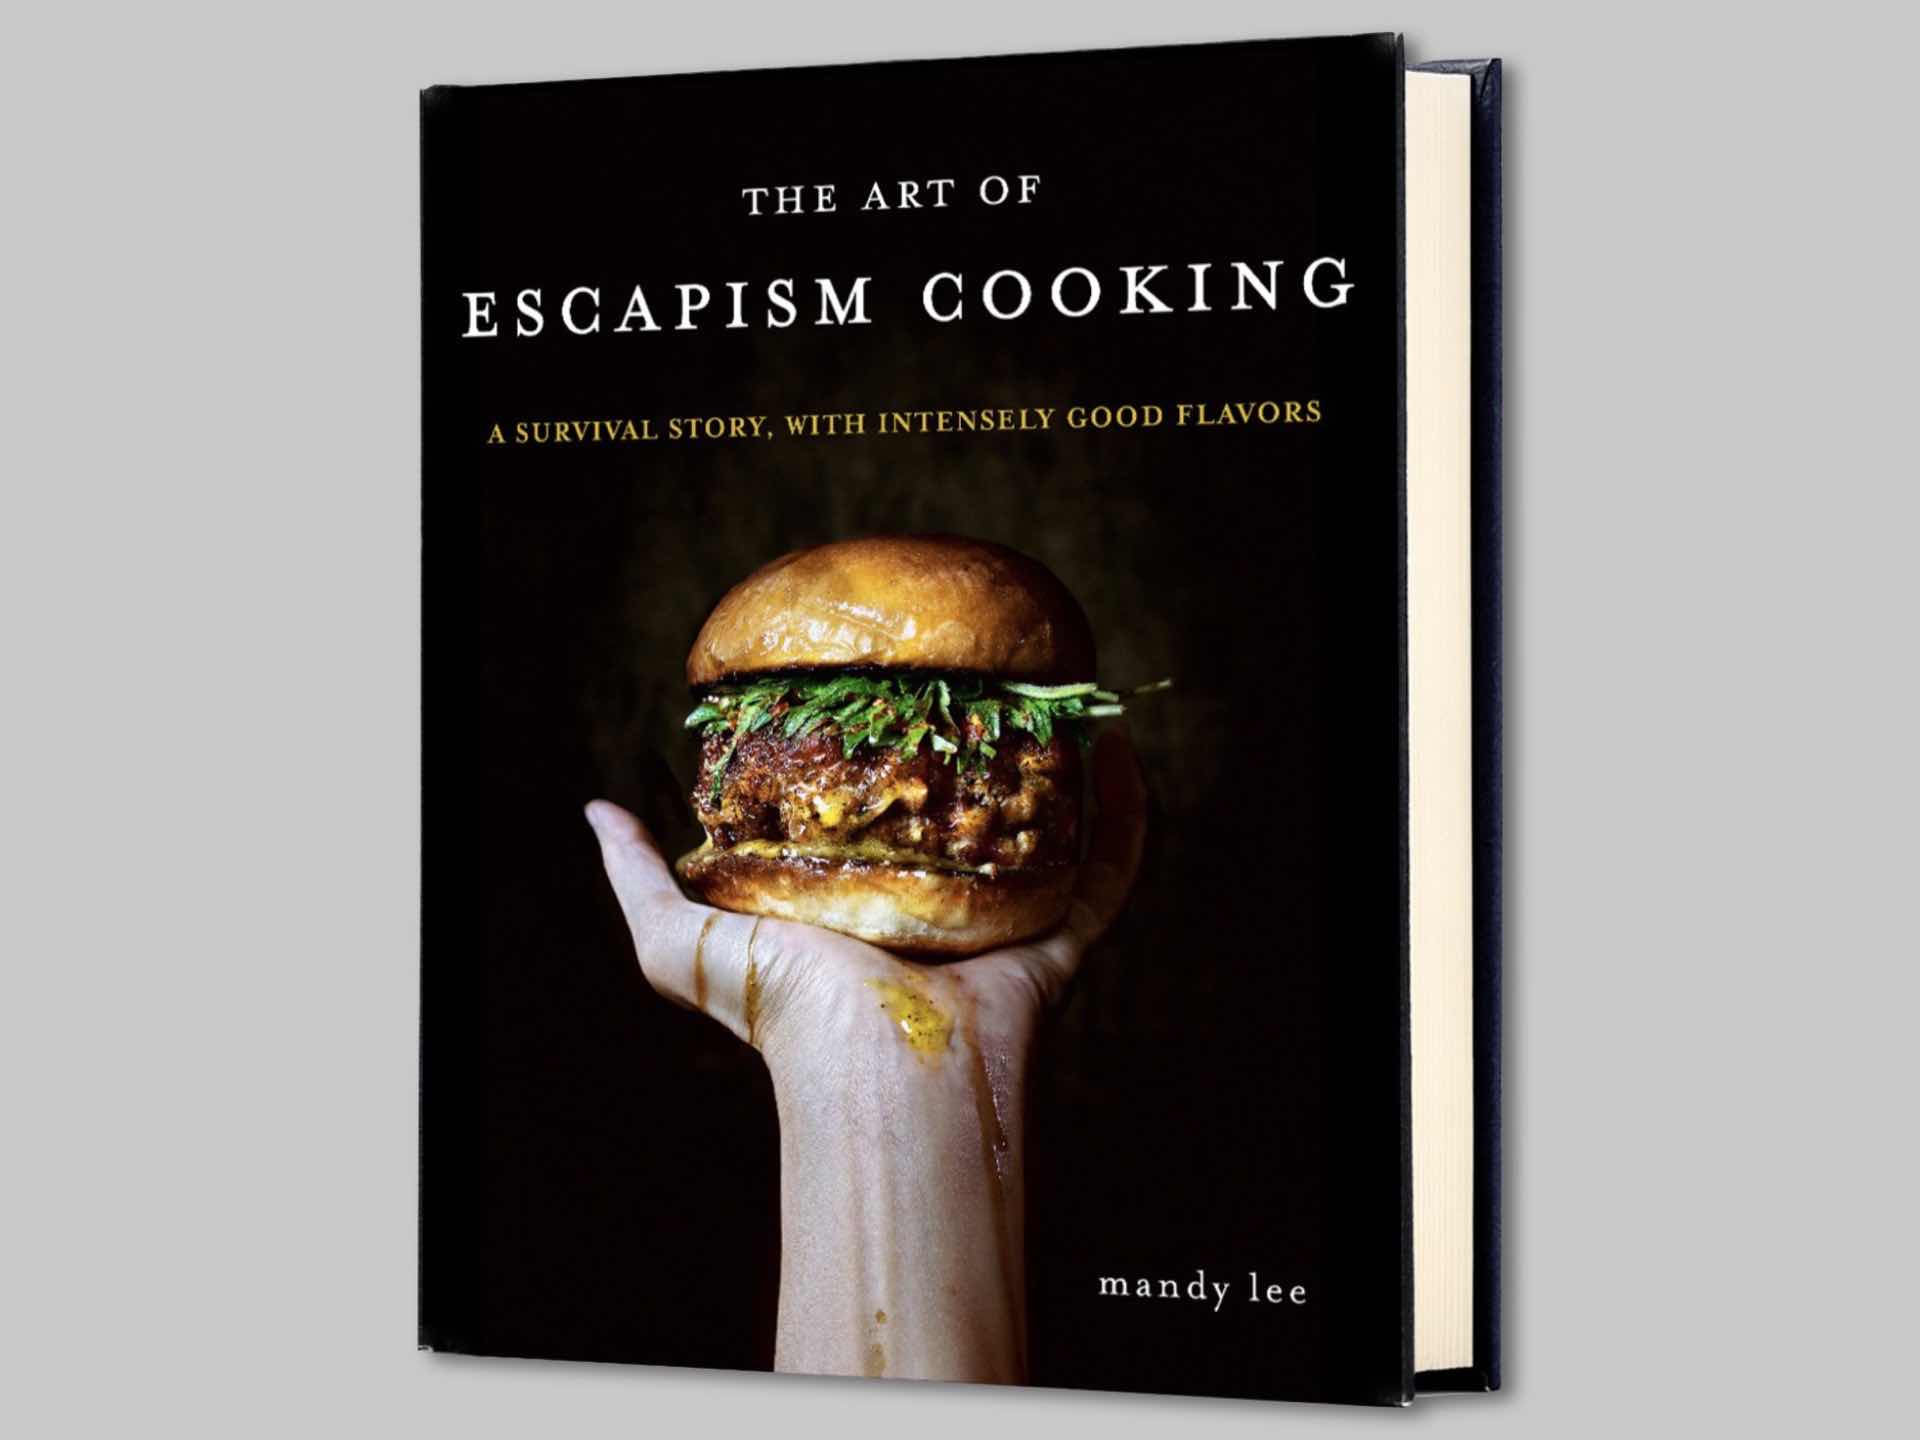 the-art-of-escapism-cooking-by-mandy-lee